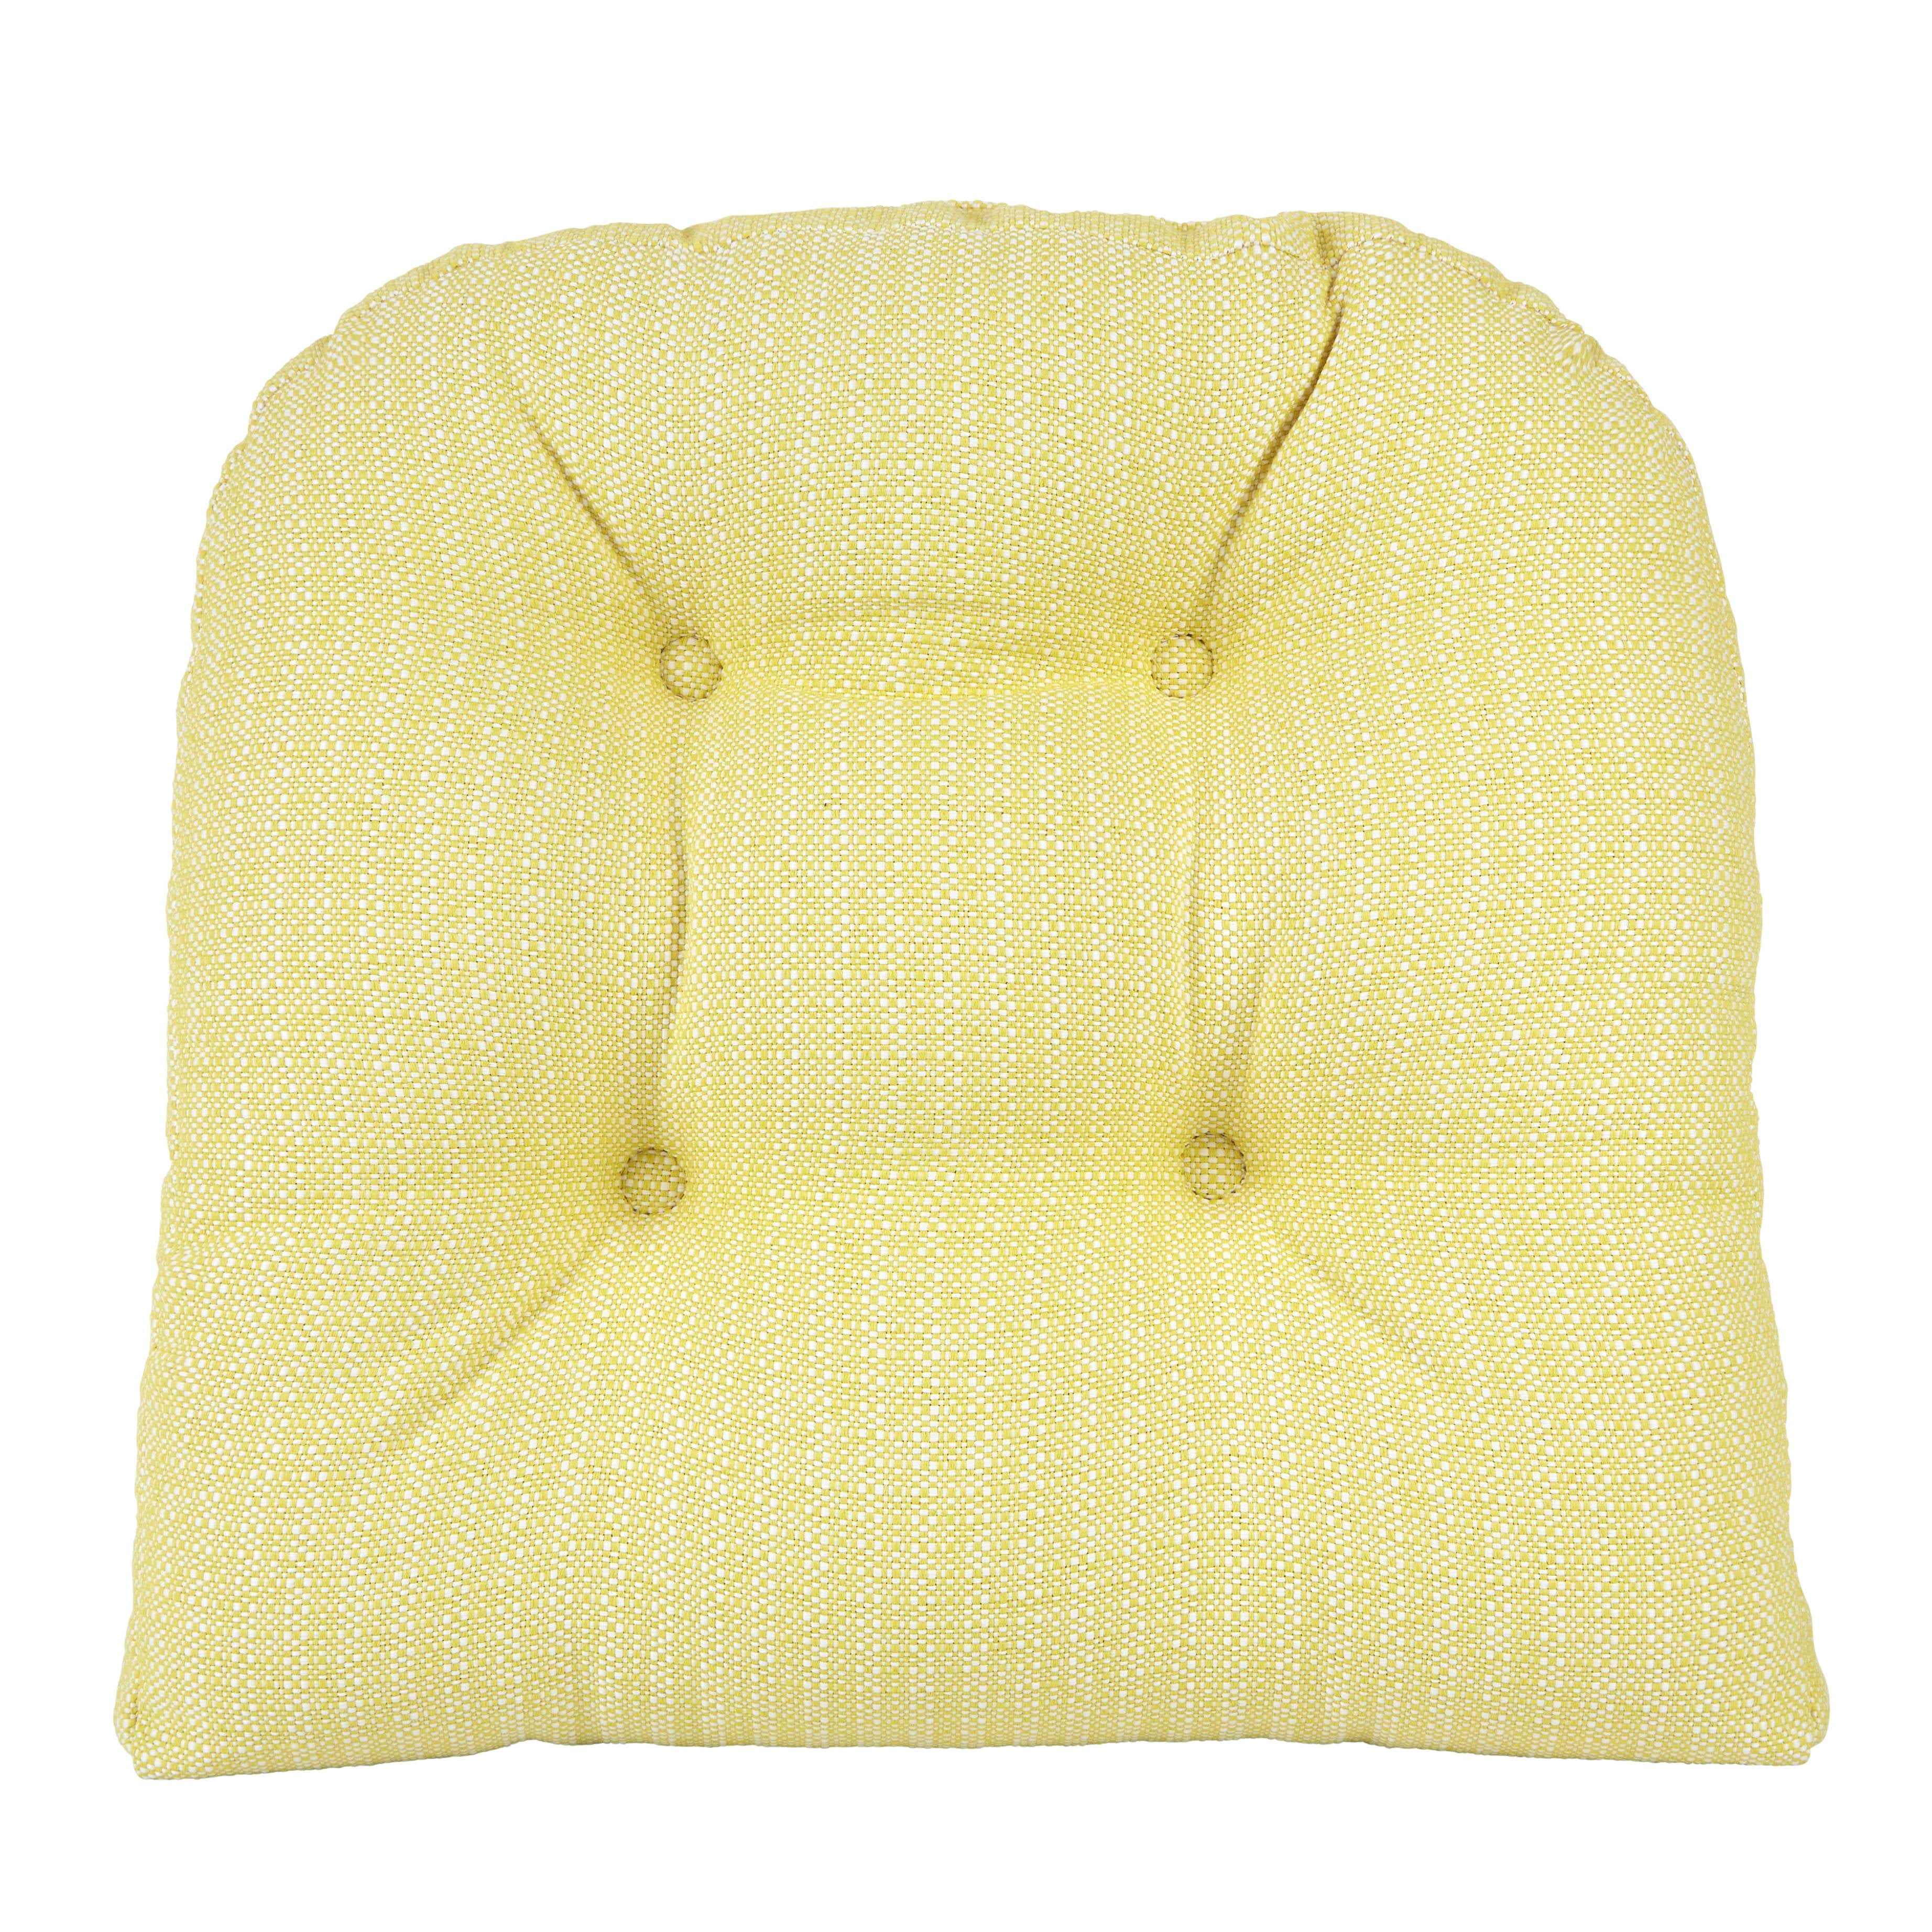 Gripper 17 x 17 Non-Slip Large Omega Tufted Chair Cushions Set of 2 -  Yellow